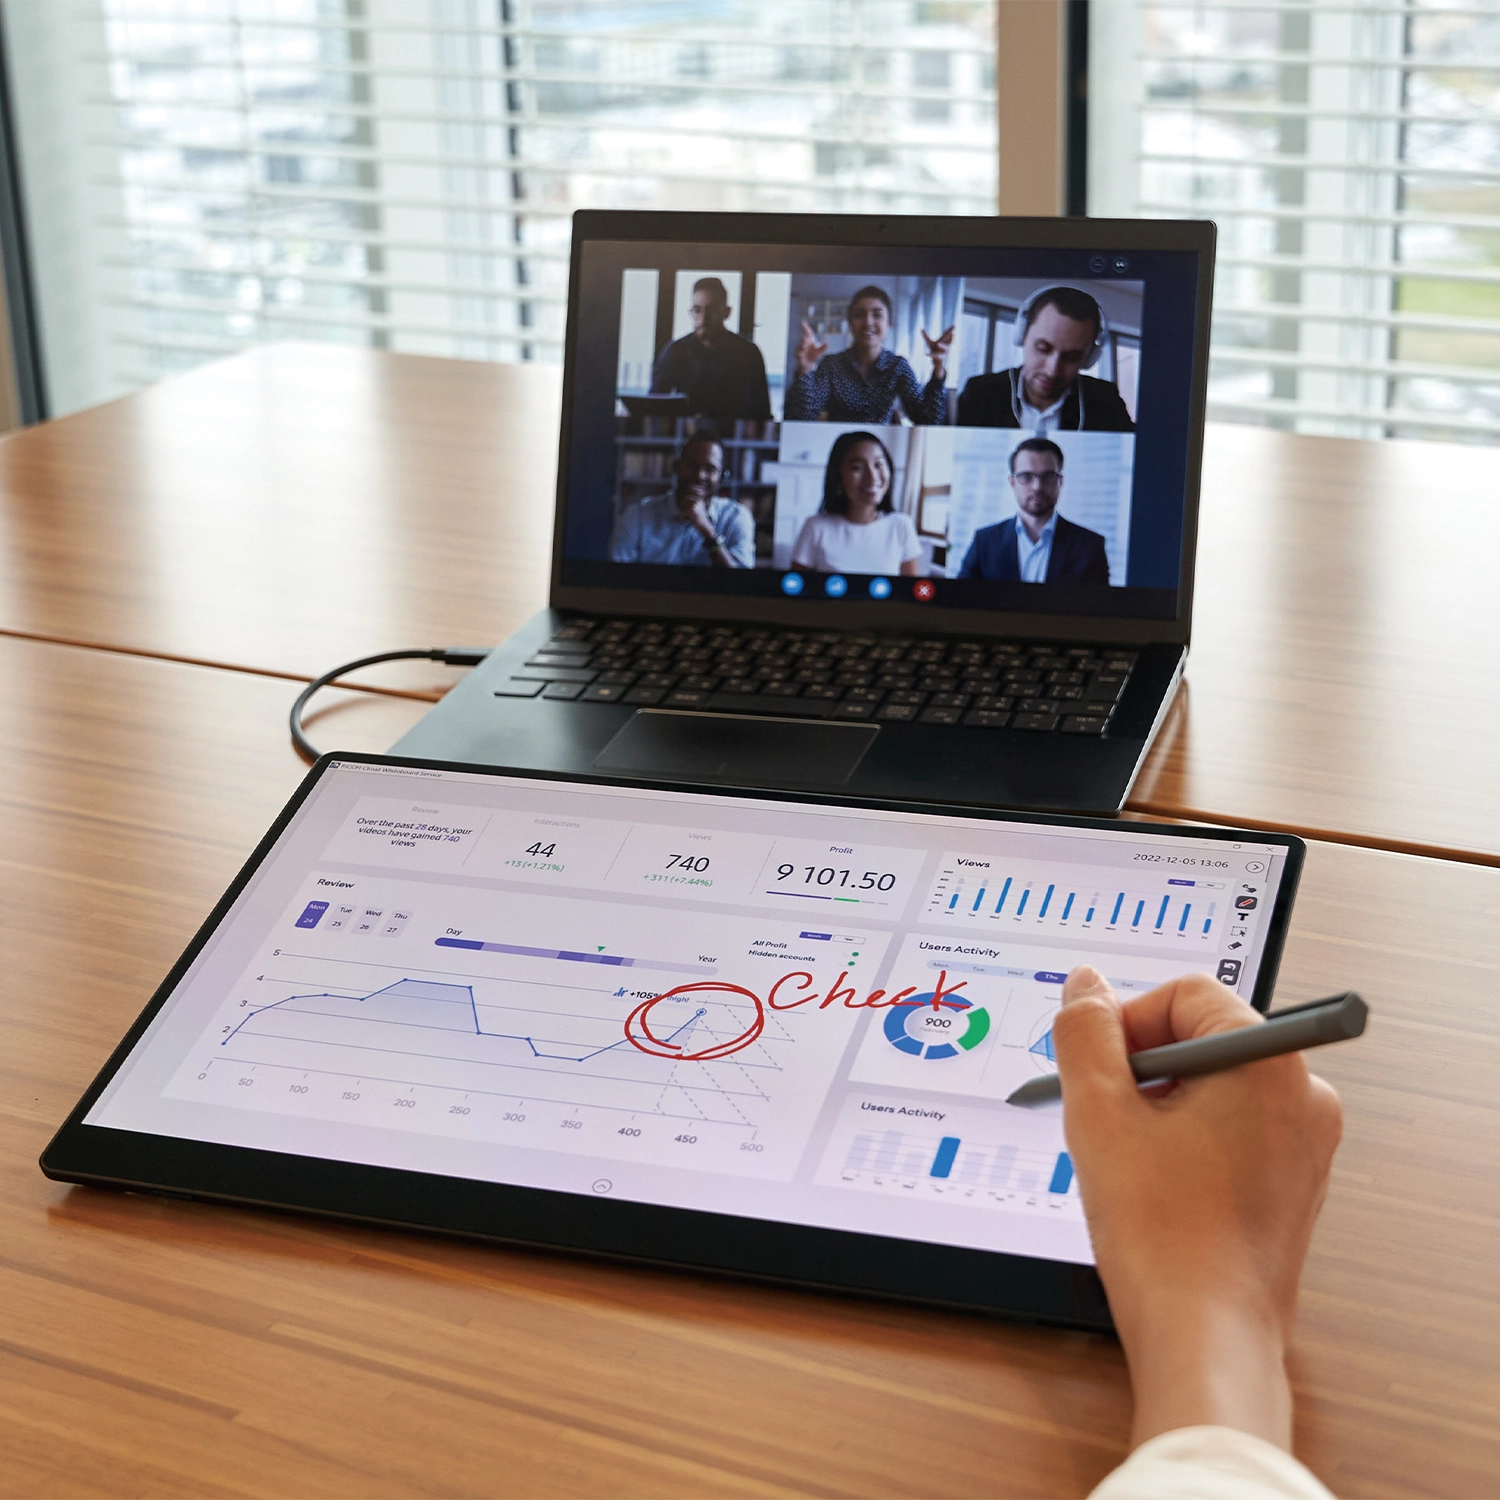 RICOH monitor with stylus being used in a virtual meeting 